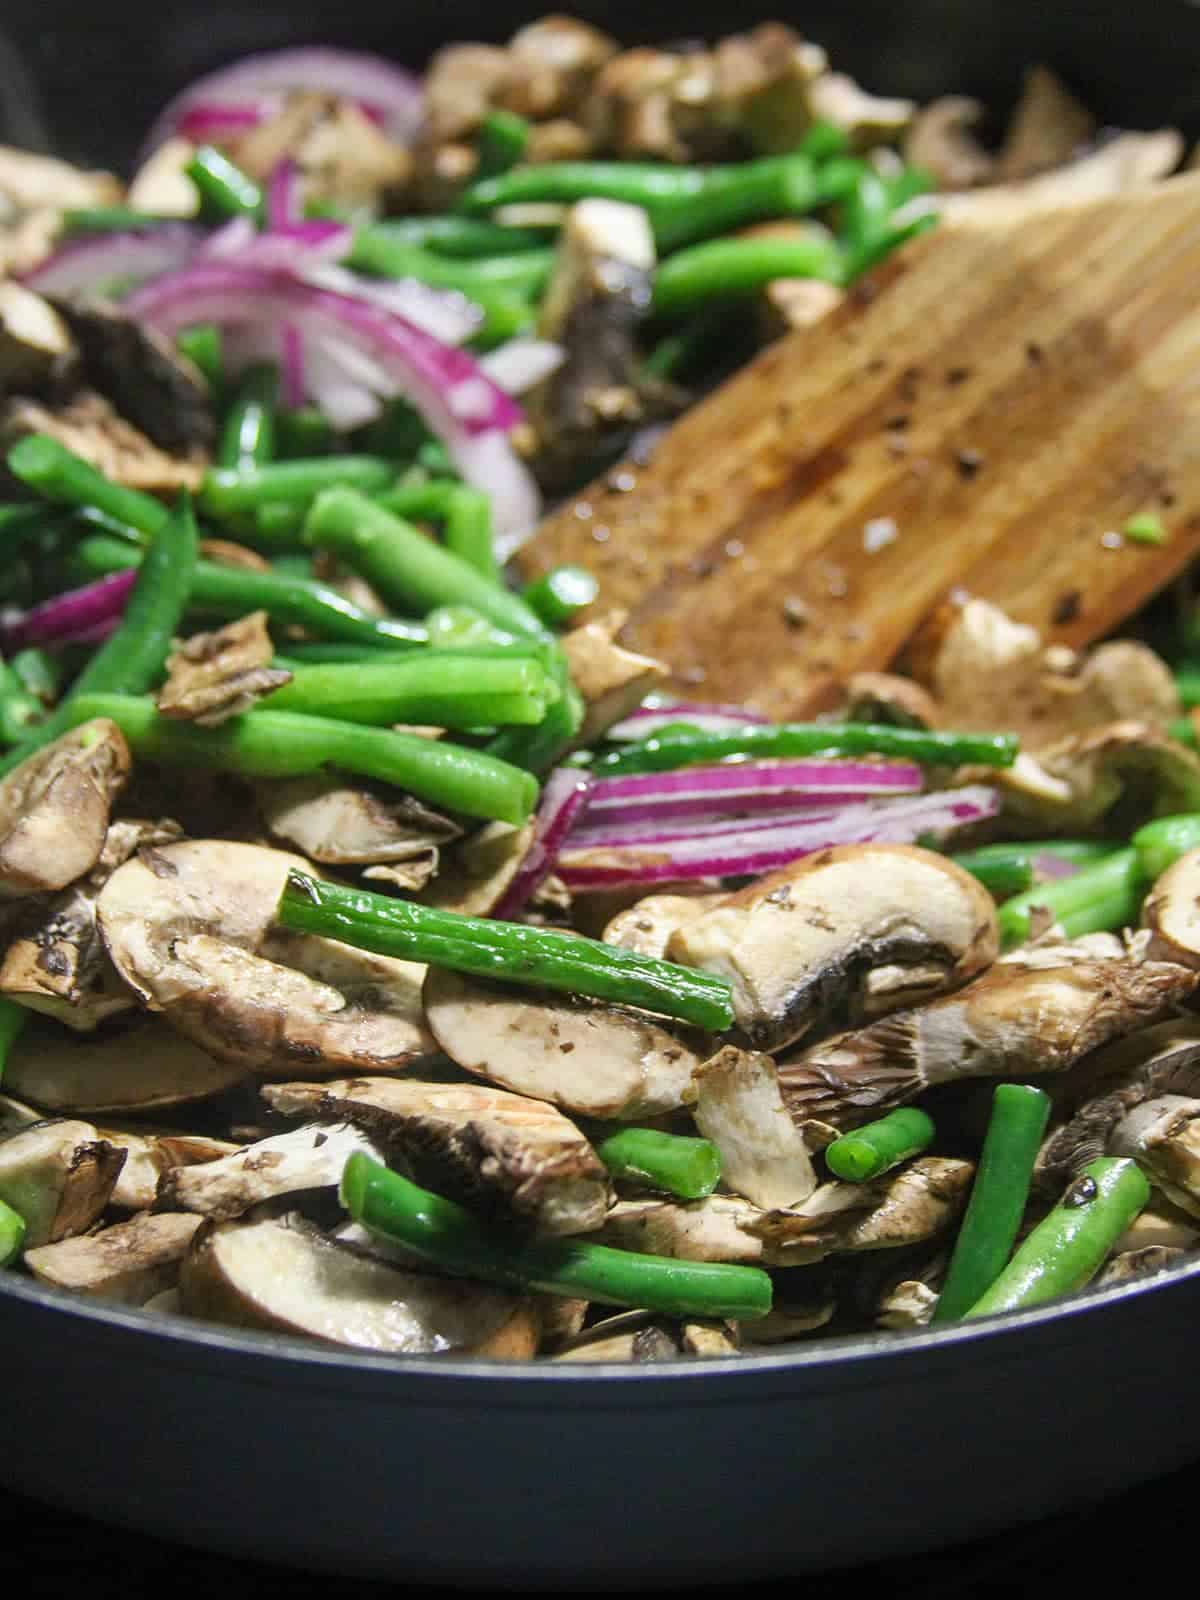 stir-frying green beans and sliced mushrooms in a wide pan